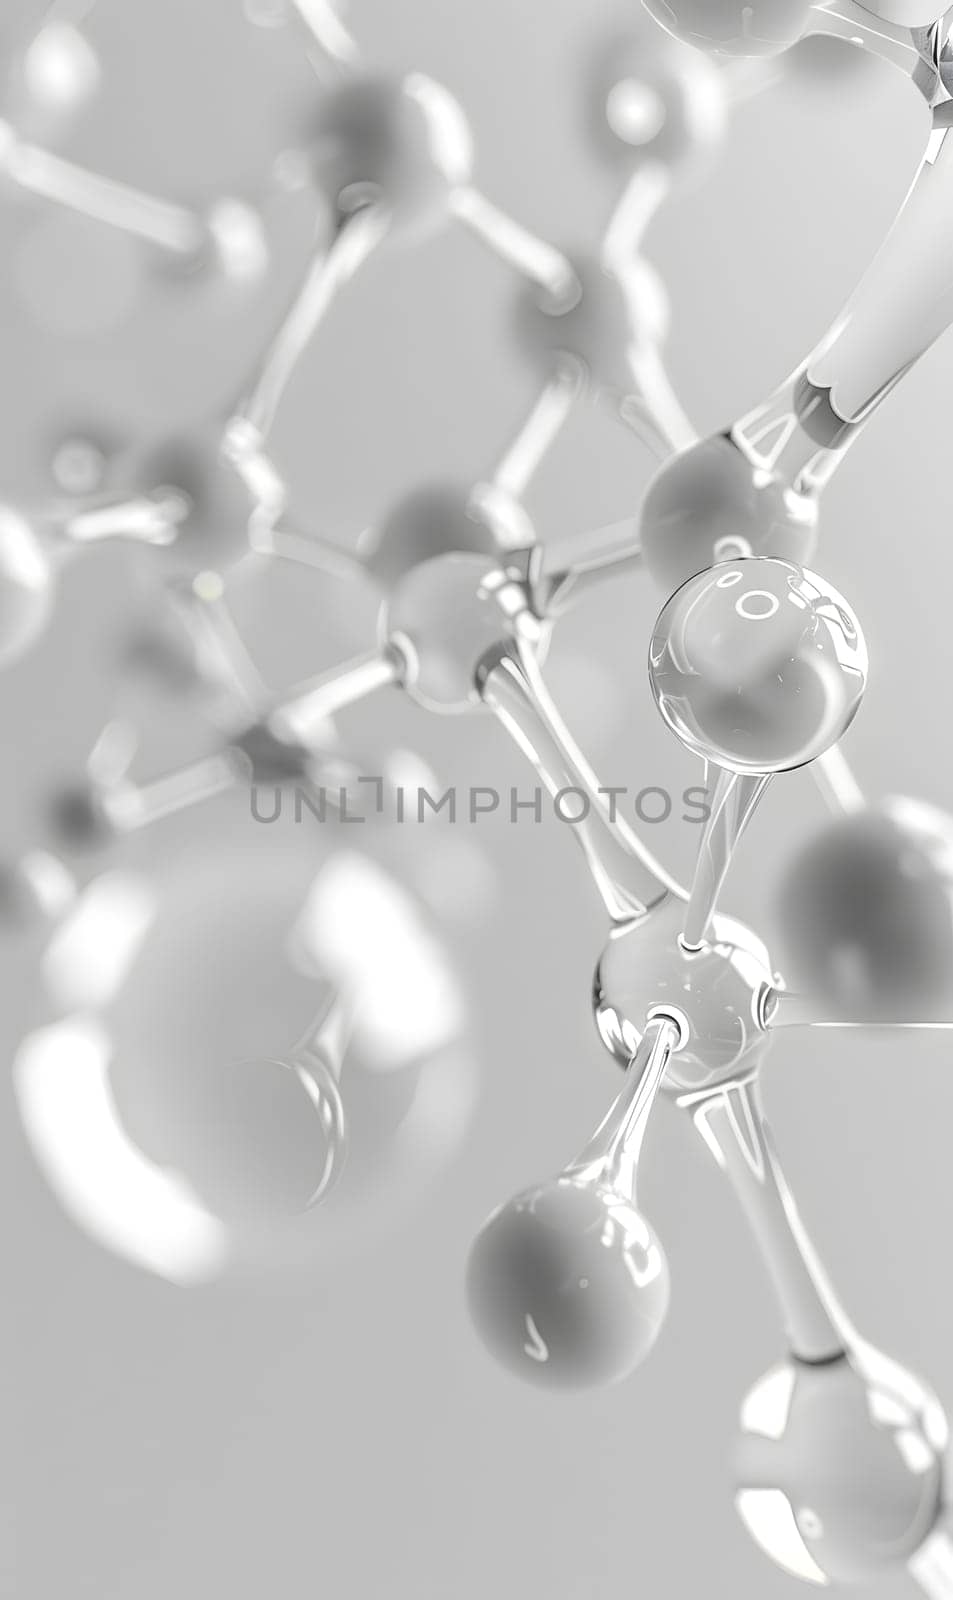 A closeup monochrome photograph of a water drop on a twig, resembling a piece of modern jewellery. The circular molecular structure stands out against the white background